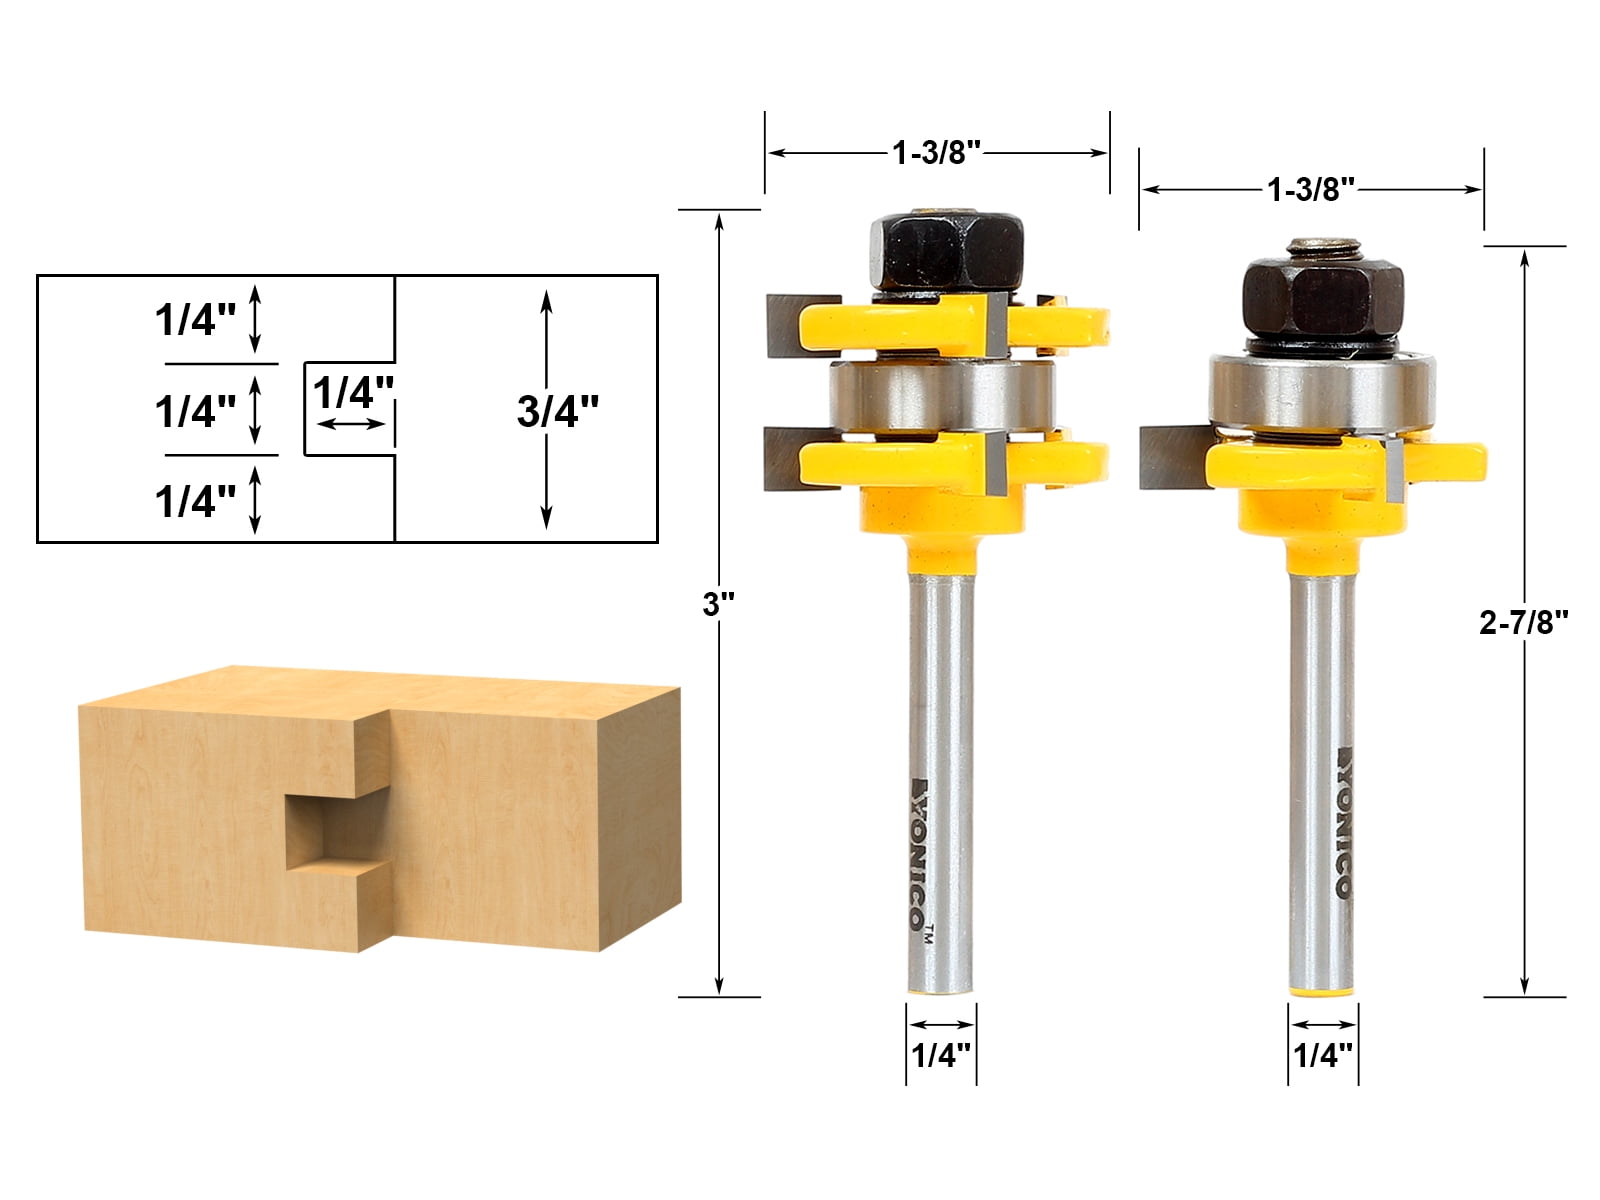 TOOLDO Tongue and Groove Router Bit & Reversible Finger Joint Router Bit for Hardwood Floor Pack of 3 Jointing Bit Set 1/4 Inch Shank Set Parallel Angle Joint Set